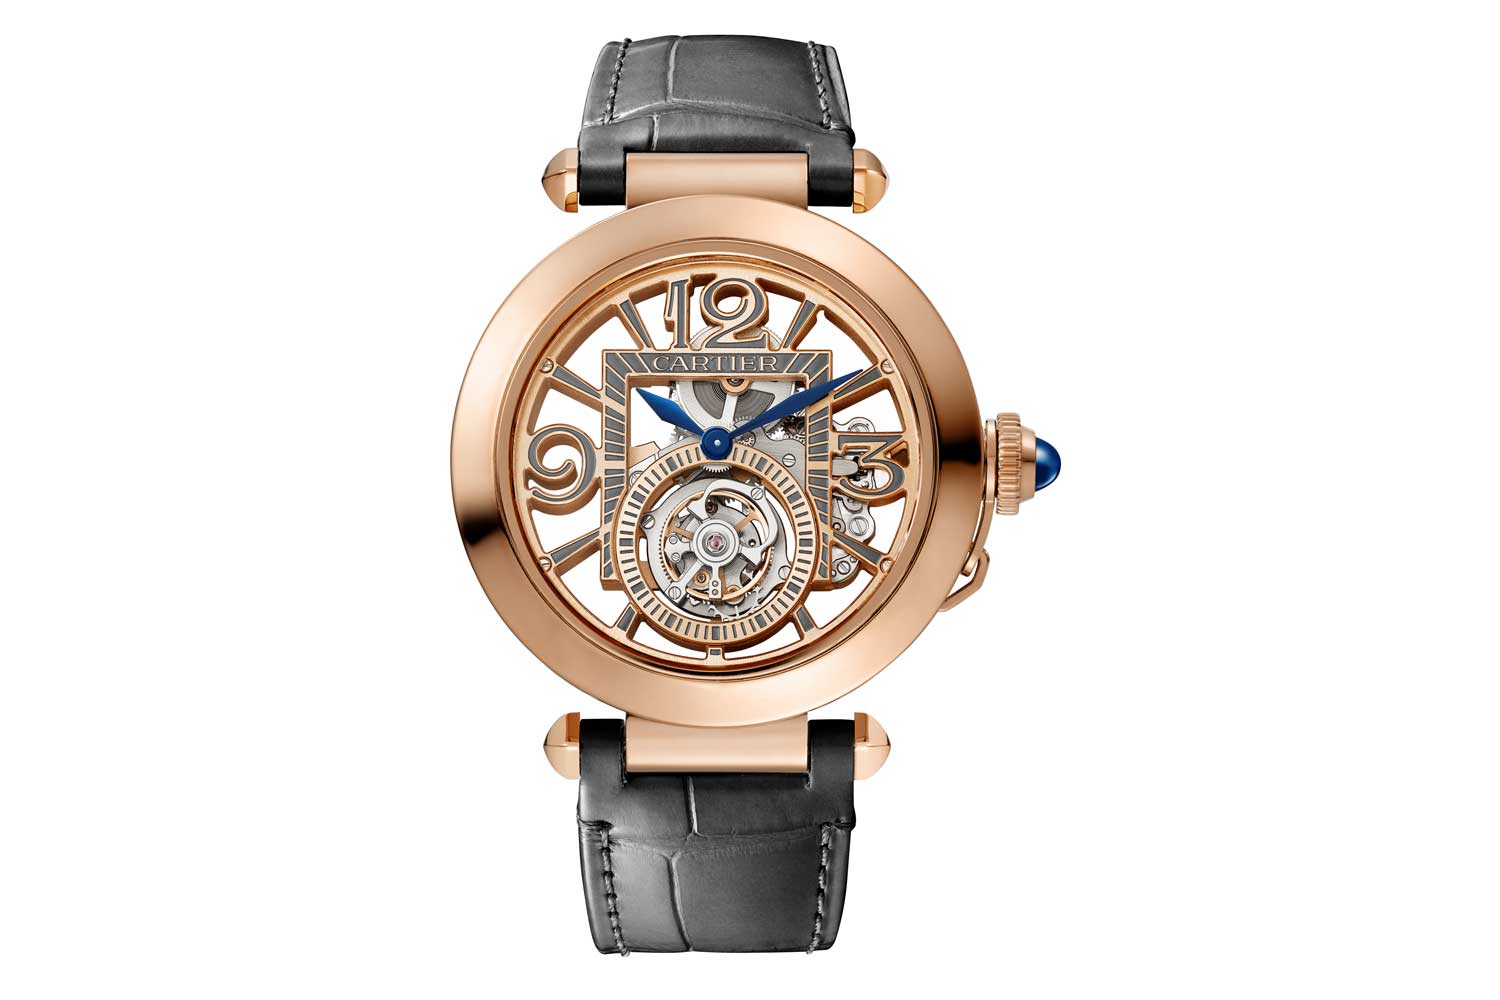 Pasha de Cartier watch, 41 mm, tourbillon; hours and minutes with skeletonised bridges forming Arabic numerals; mechanical movement with manual winding, calibre 9466 MC. 18K rose gold case, fluted crown set with a sapphire, blued-steel diamond-shaped hands, 2 alligator-skin straps, 1 black and 1 dark grey with "QuickSwitch" interchangeability system, interchangeable 18K rose gold folding buckle